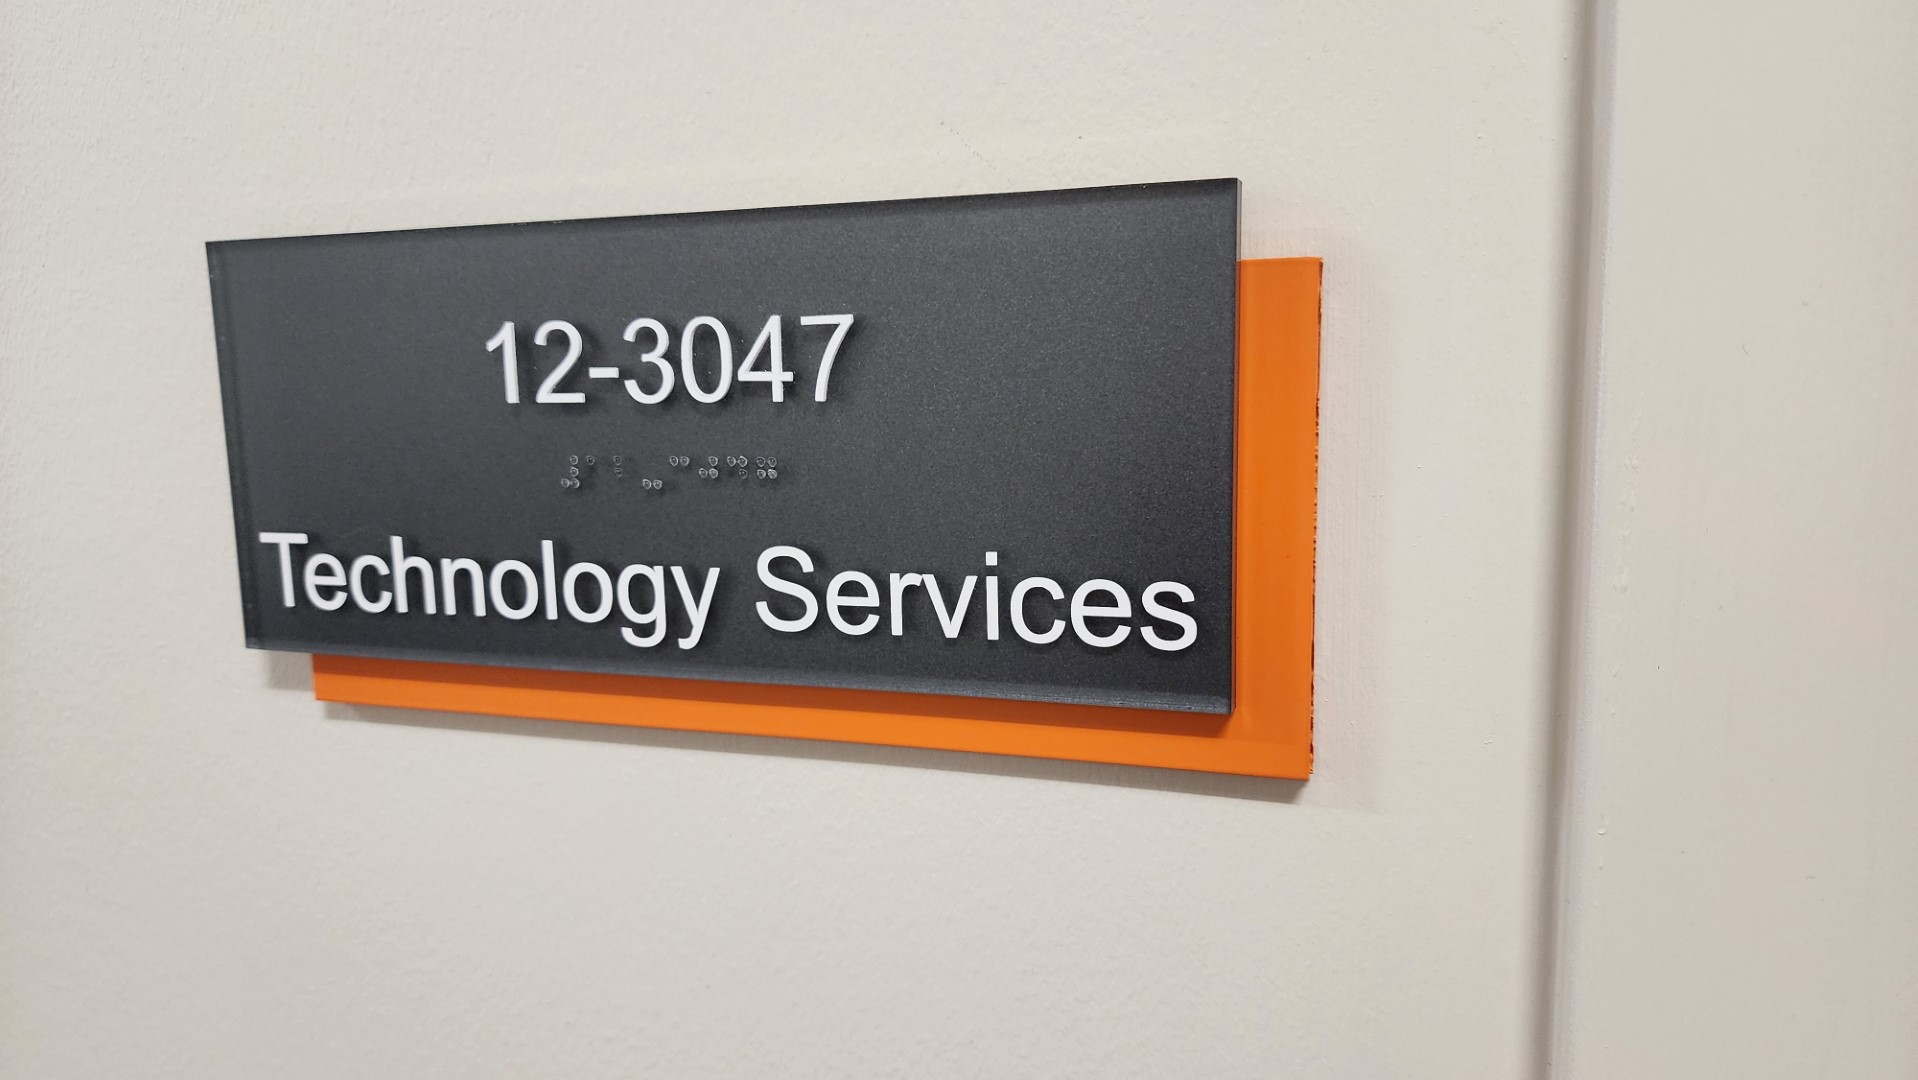 Saunders Technical Support room sign